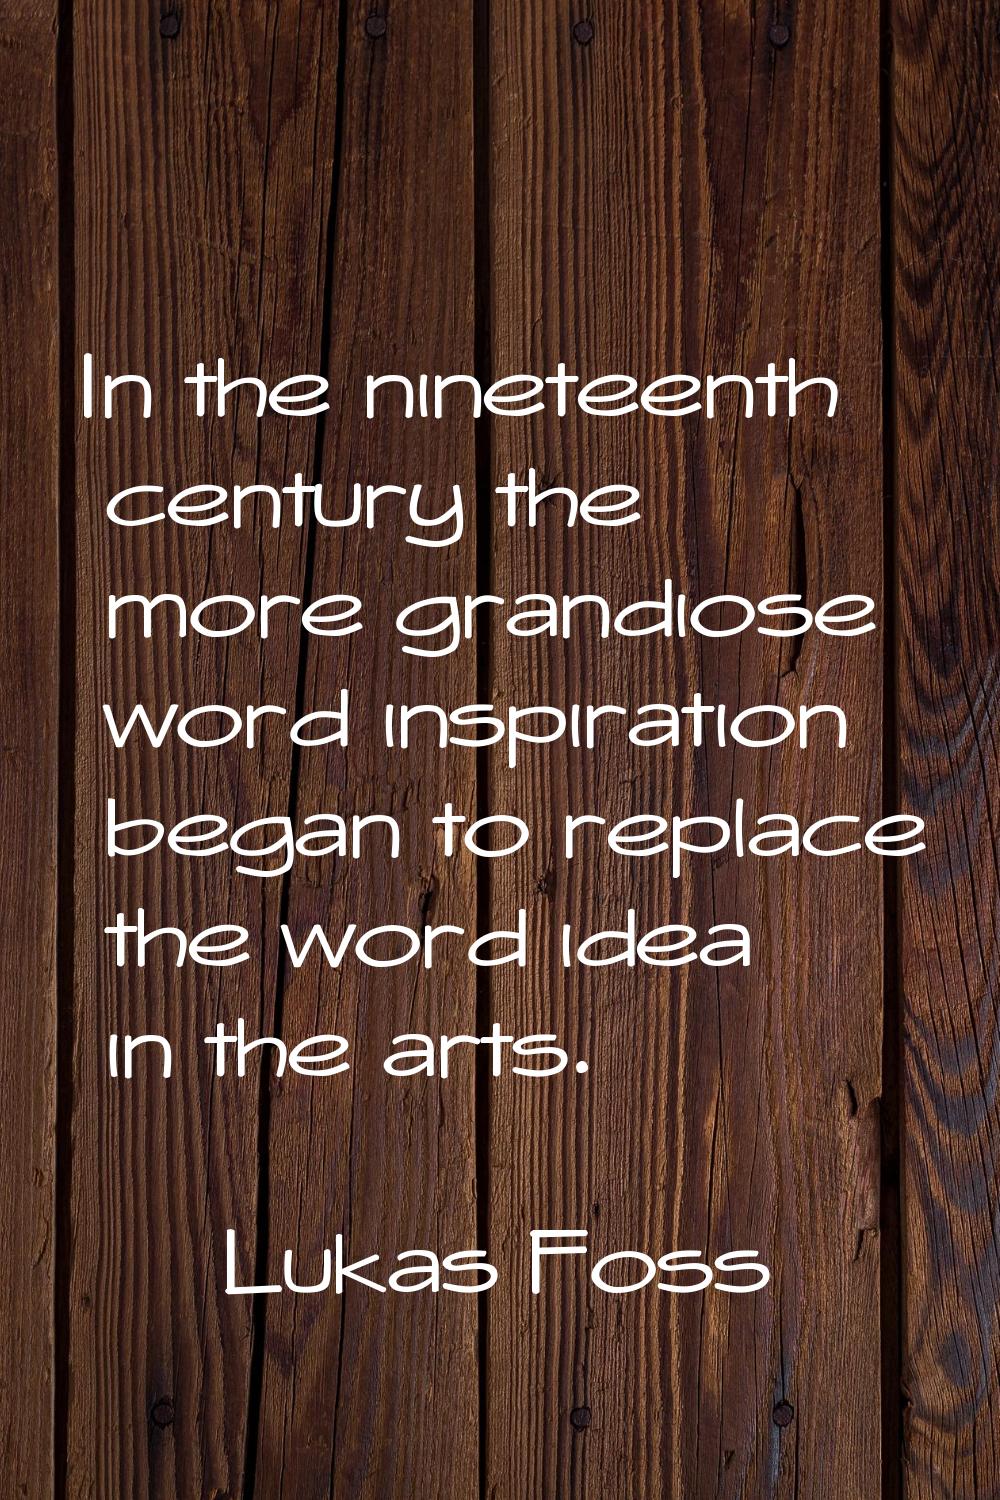 In the nineteenth century the more grandiose word inspiration began to replace the word idea in the